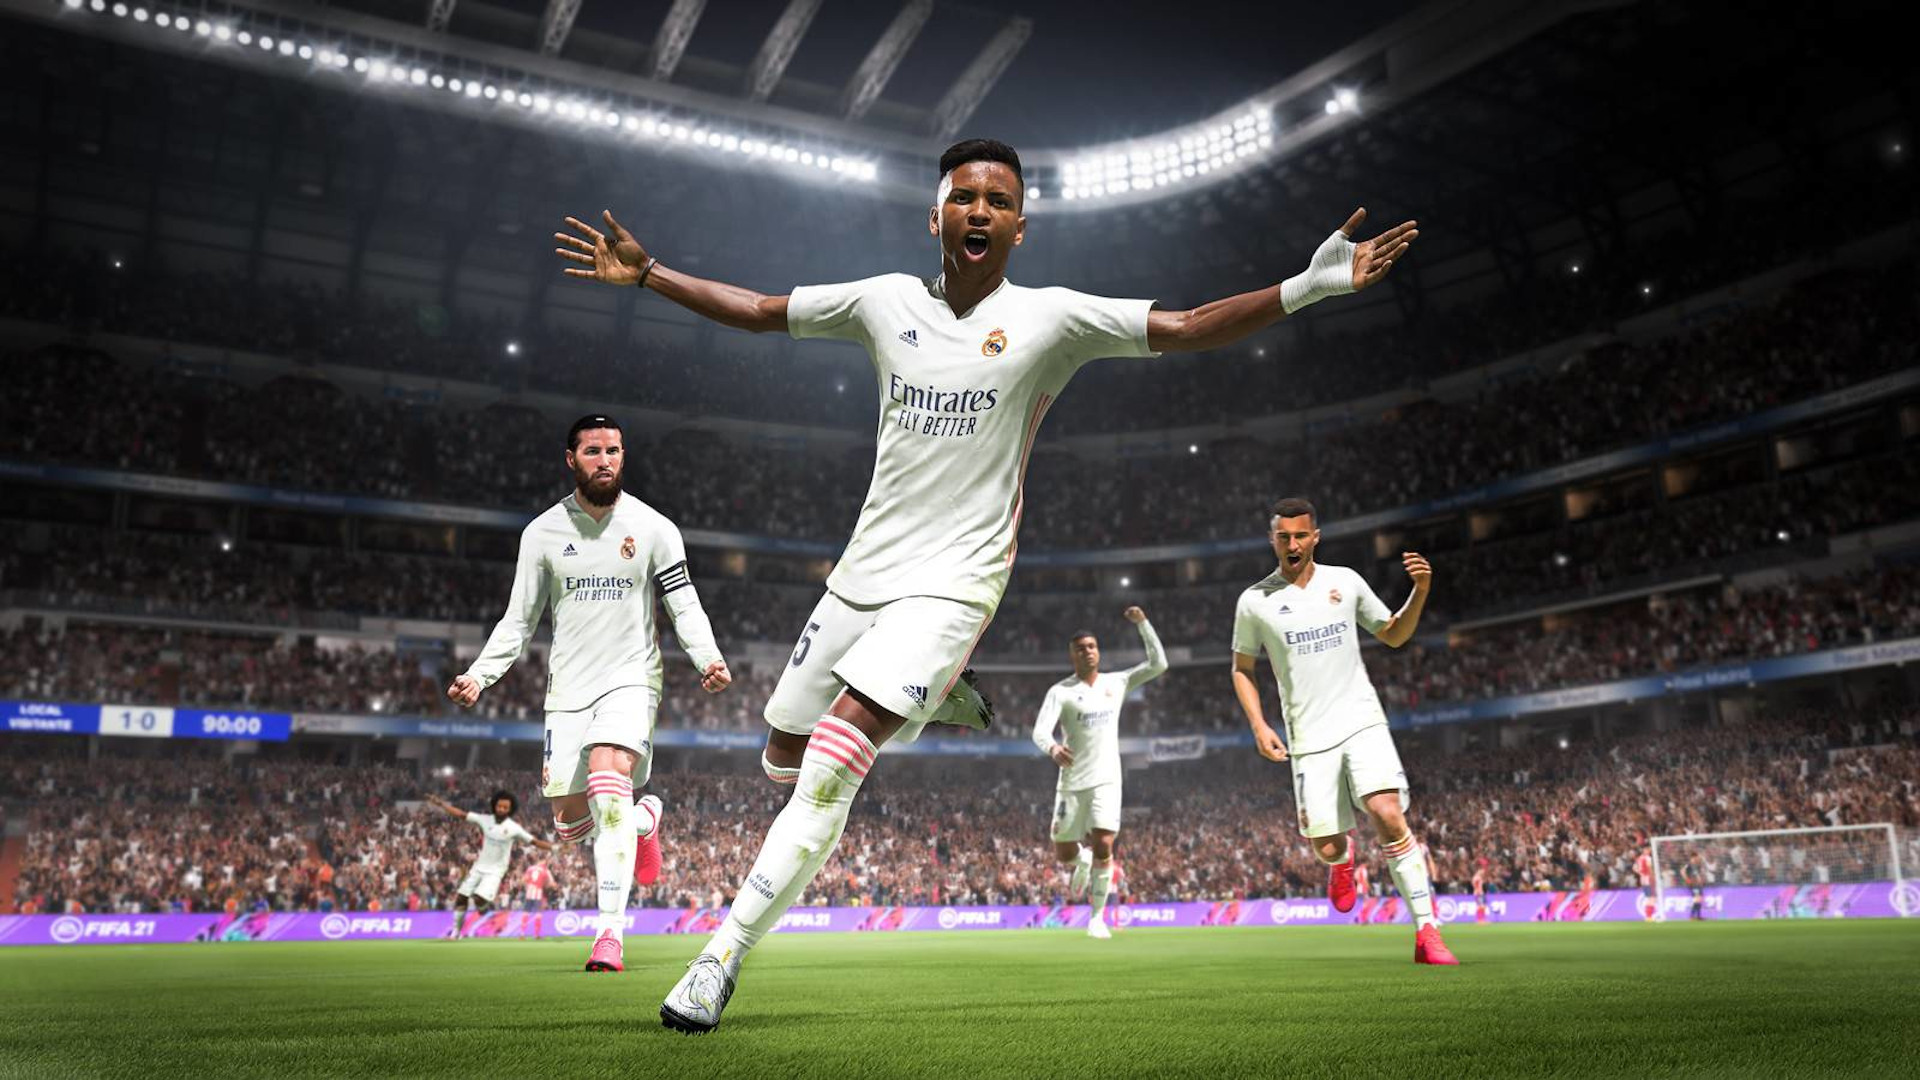 FIFA 22 Career Mode: Four Real Madrid players cheer after scoring a goal.